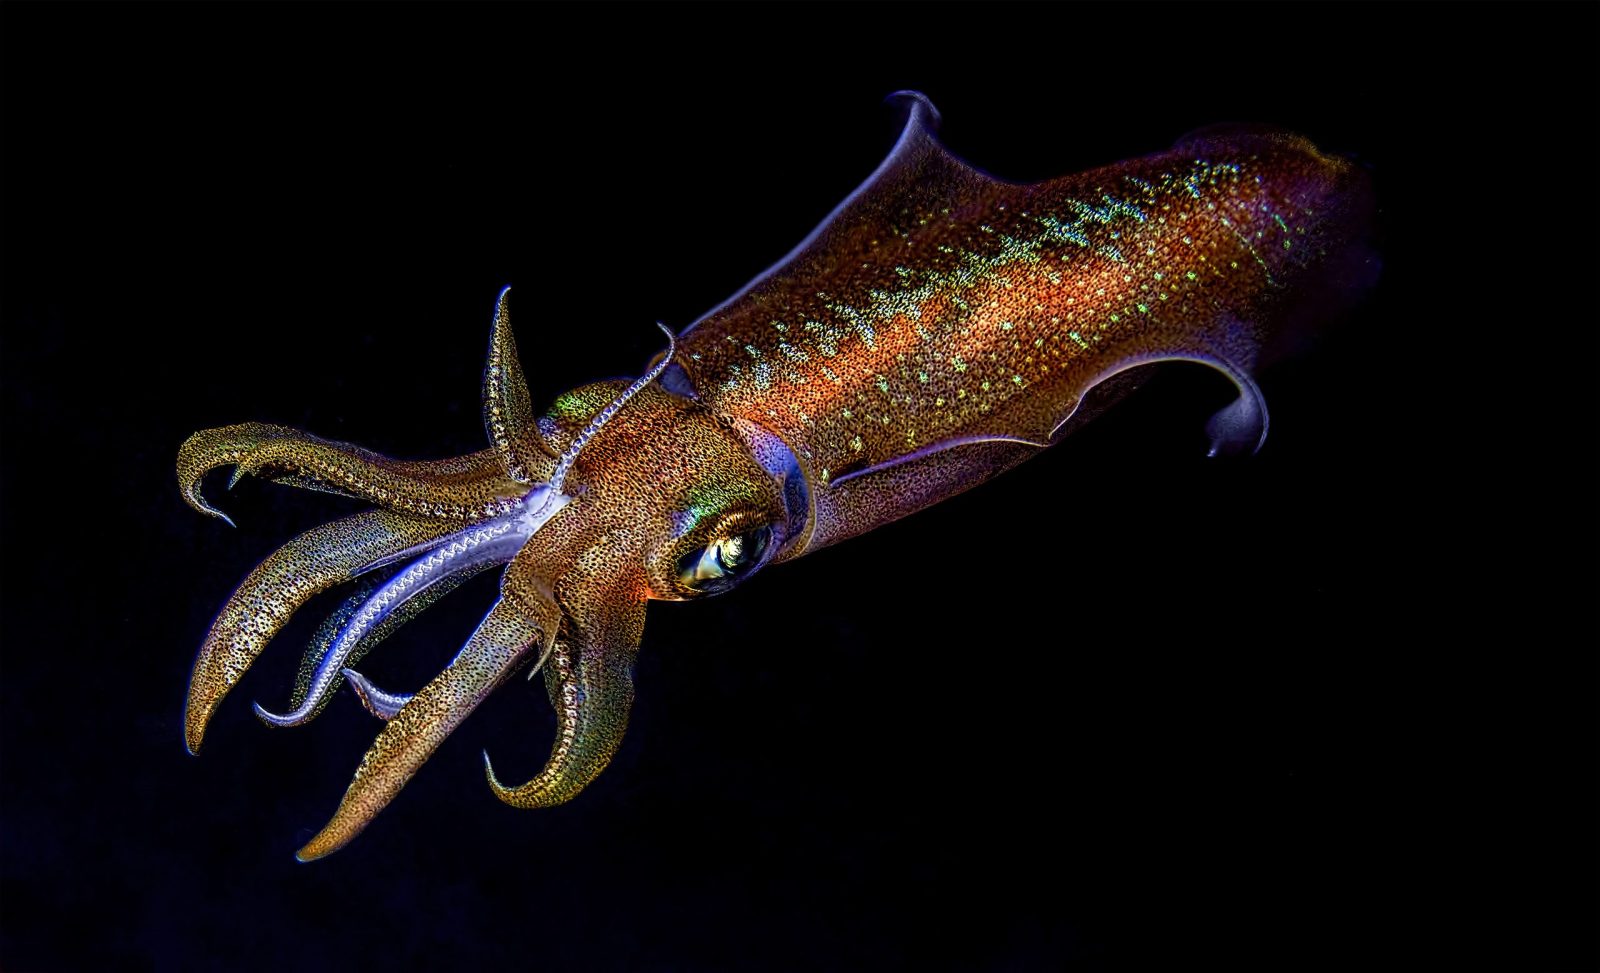 Squid on its night dive hunting